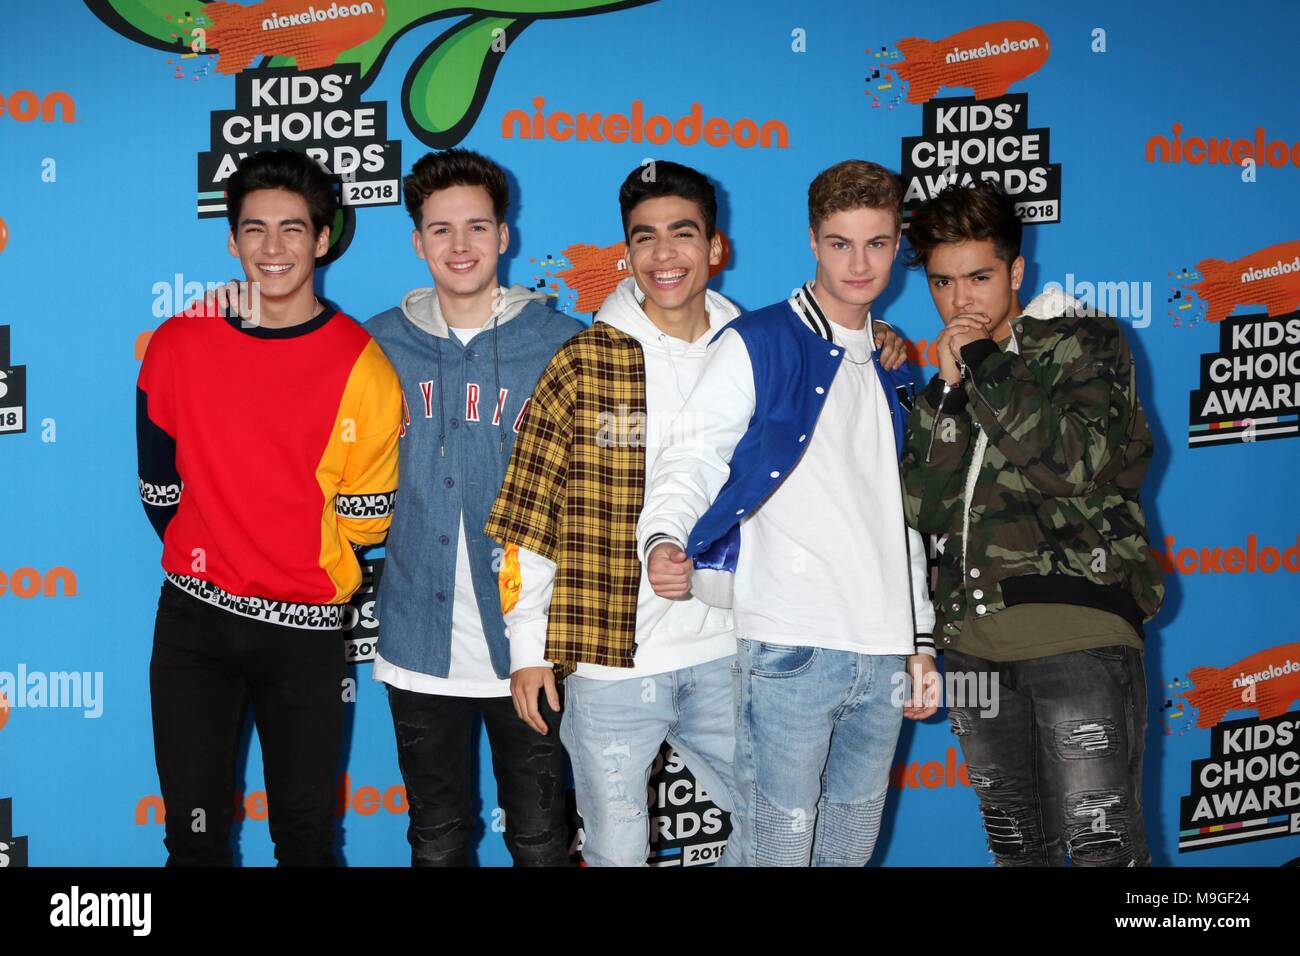 Chance Perez, Michael Conor, Drew Ramos, Sergio Calderon, Brady Tutton at arrivals for Nickelodeon's 2018 Kids' Choice Awards - Part 2, The Forum, Inglewood, CA March 24, 2018. Photo By: Priscilla Grant/Everett Collection Stock Photo